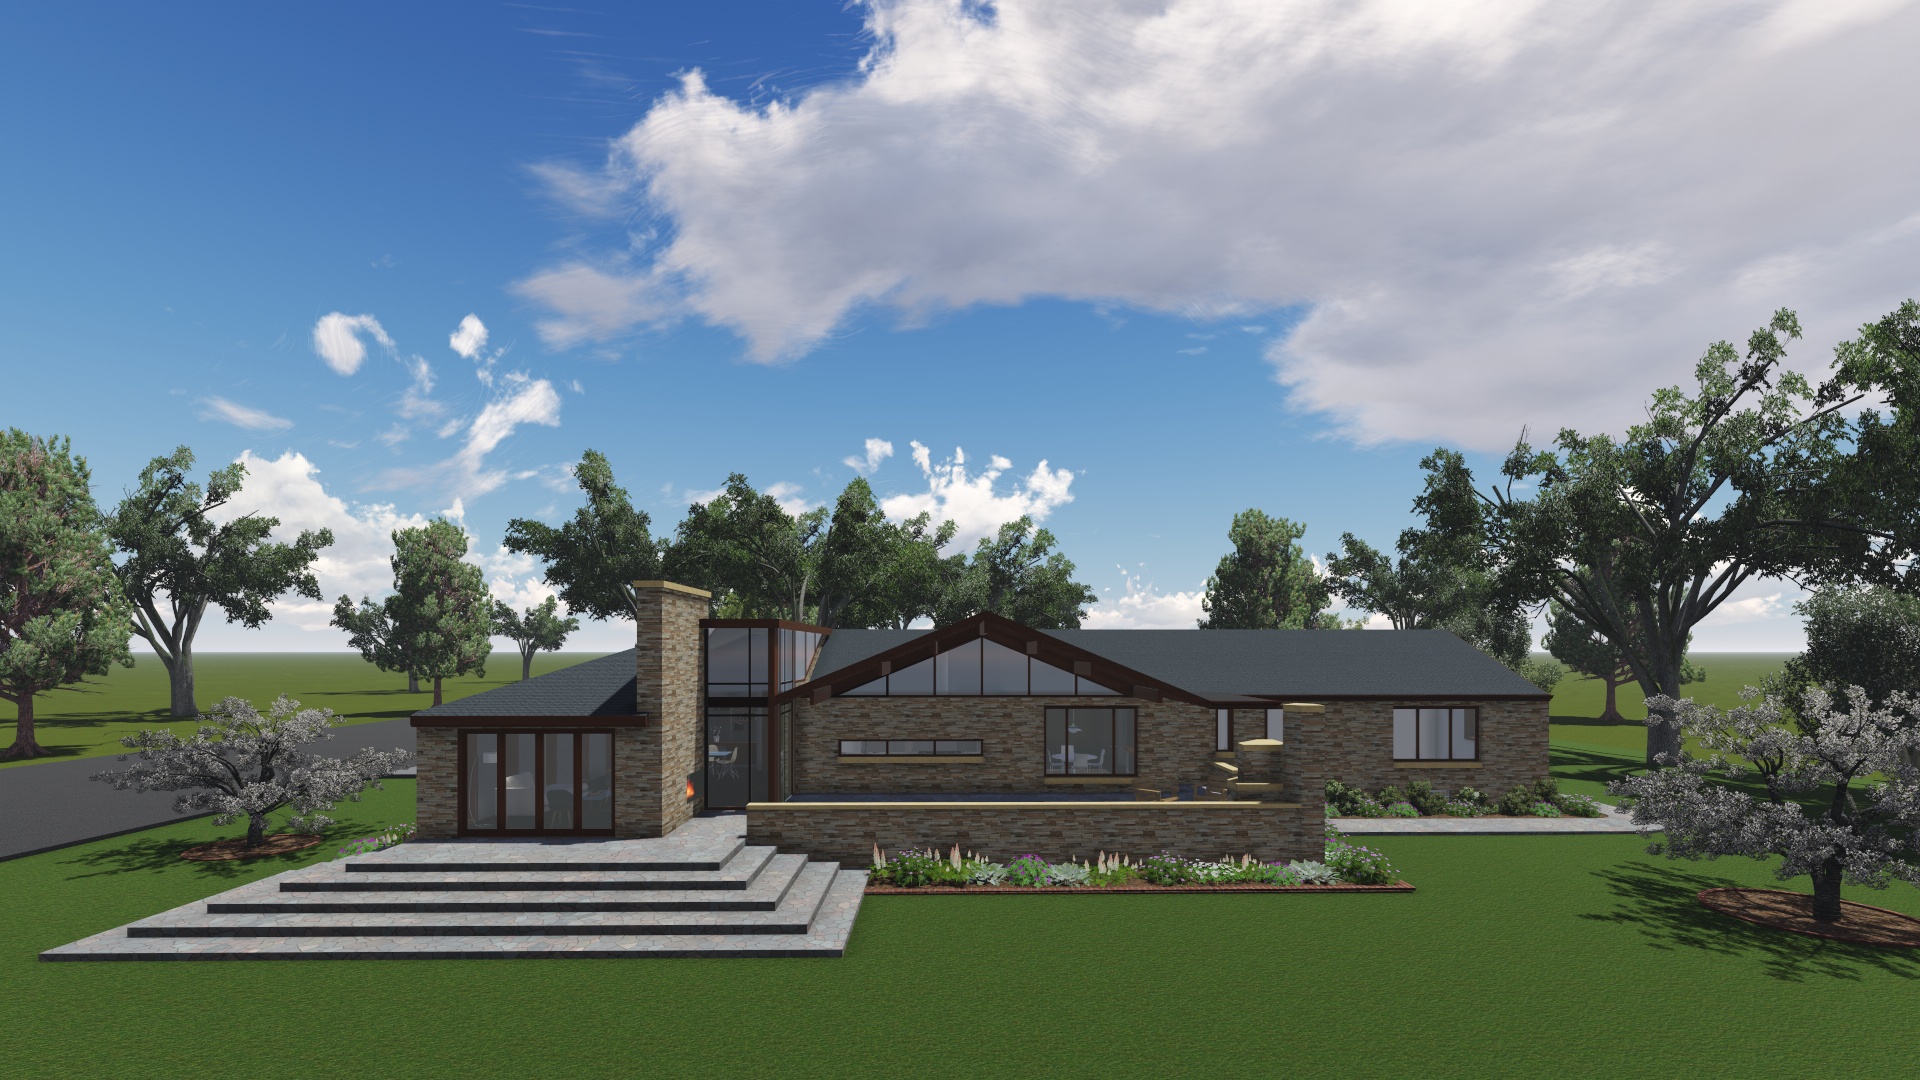 COMPLETED: Mid-Century Modern Addition Proposal